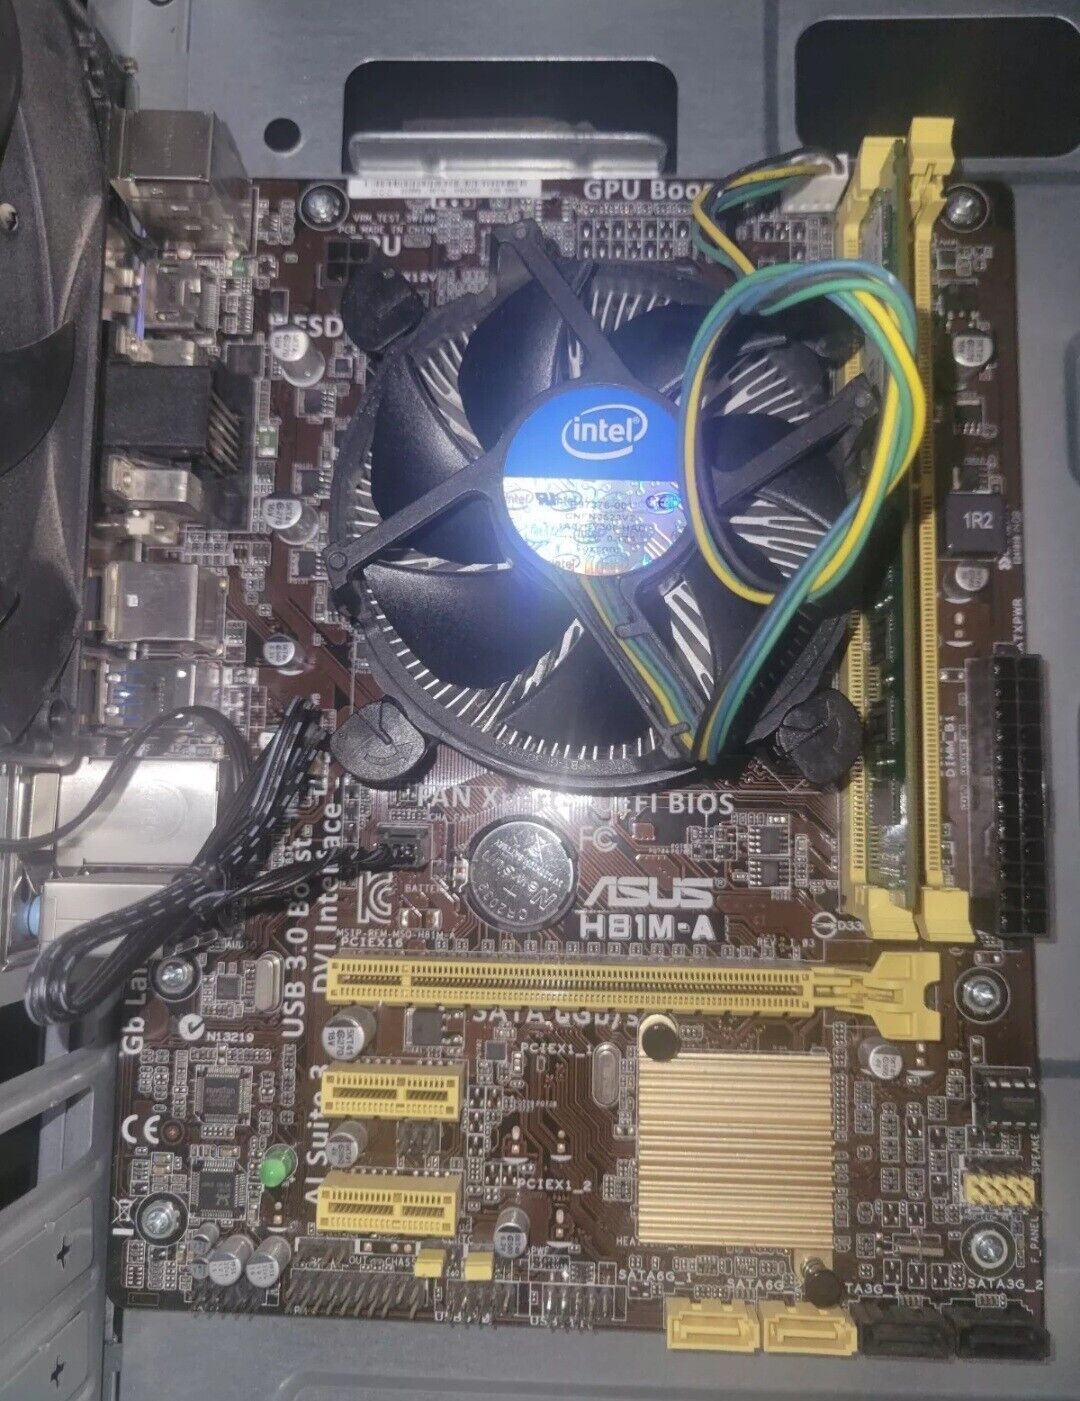 Intel 3.0 GHz i5 4430 CPU + ASUS H81M-A Motherboard + 8GB RAM Tested